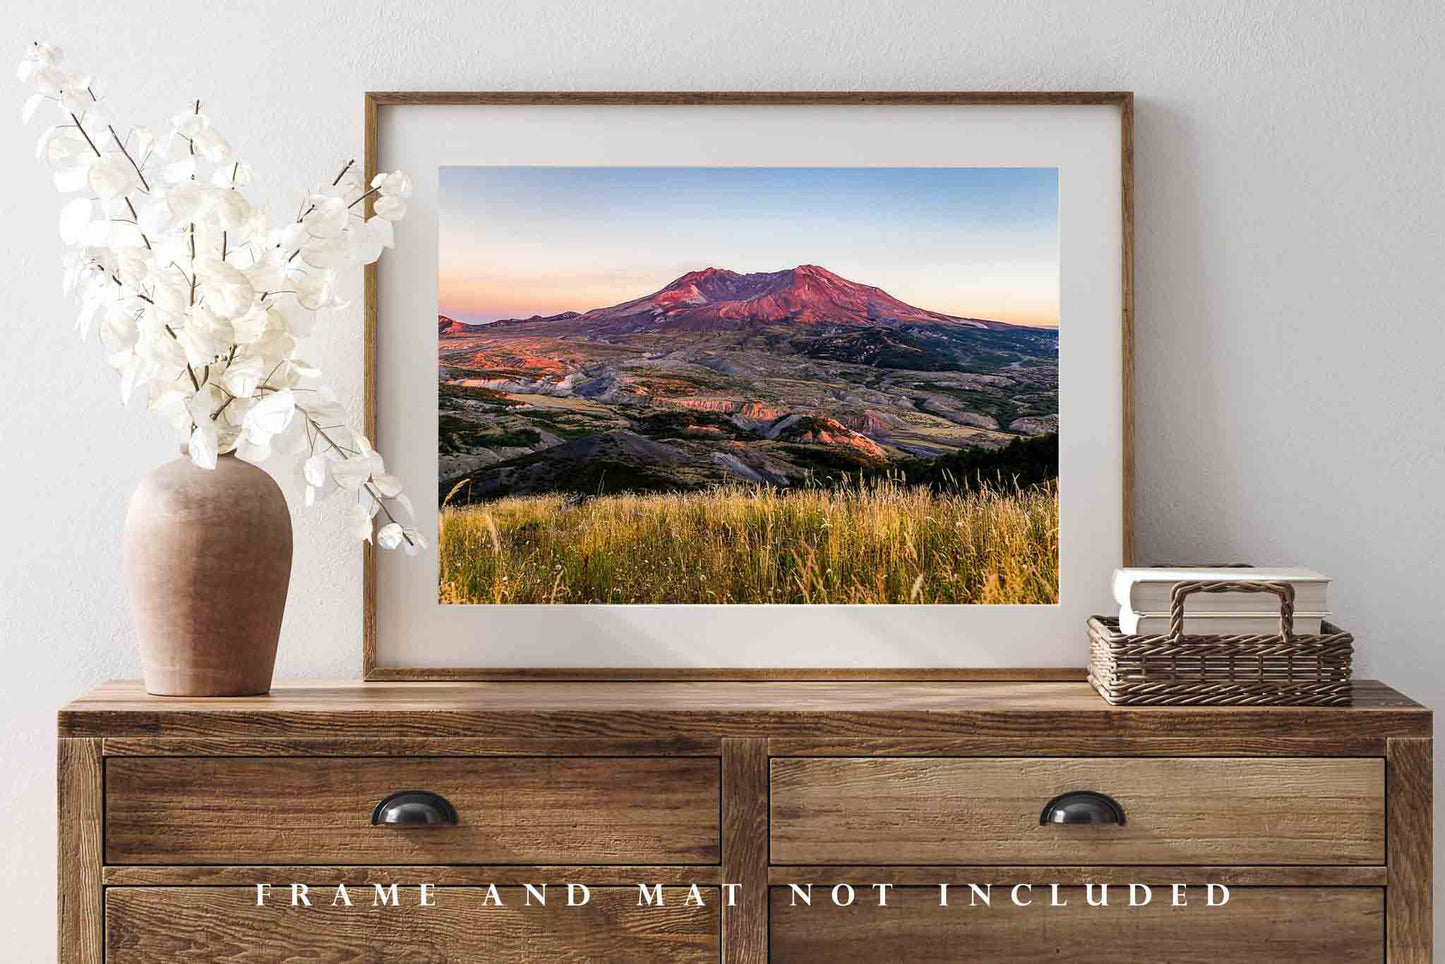 Pacific Northwest Photography Print - Picture of Mount St. Helens at Sunset in Washington State Volcano Photo Wall Art Decor Artwork